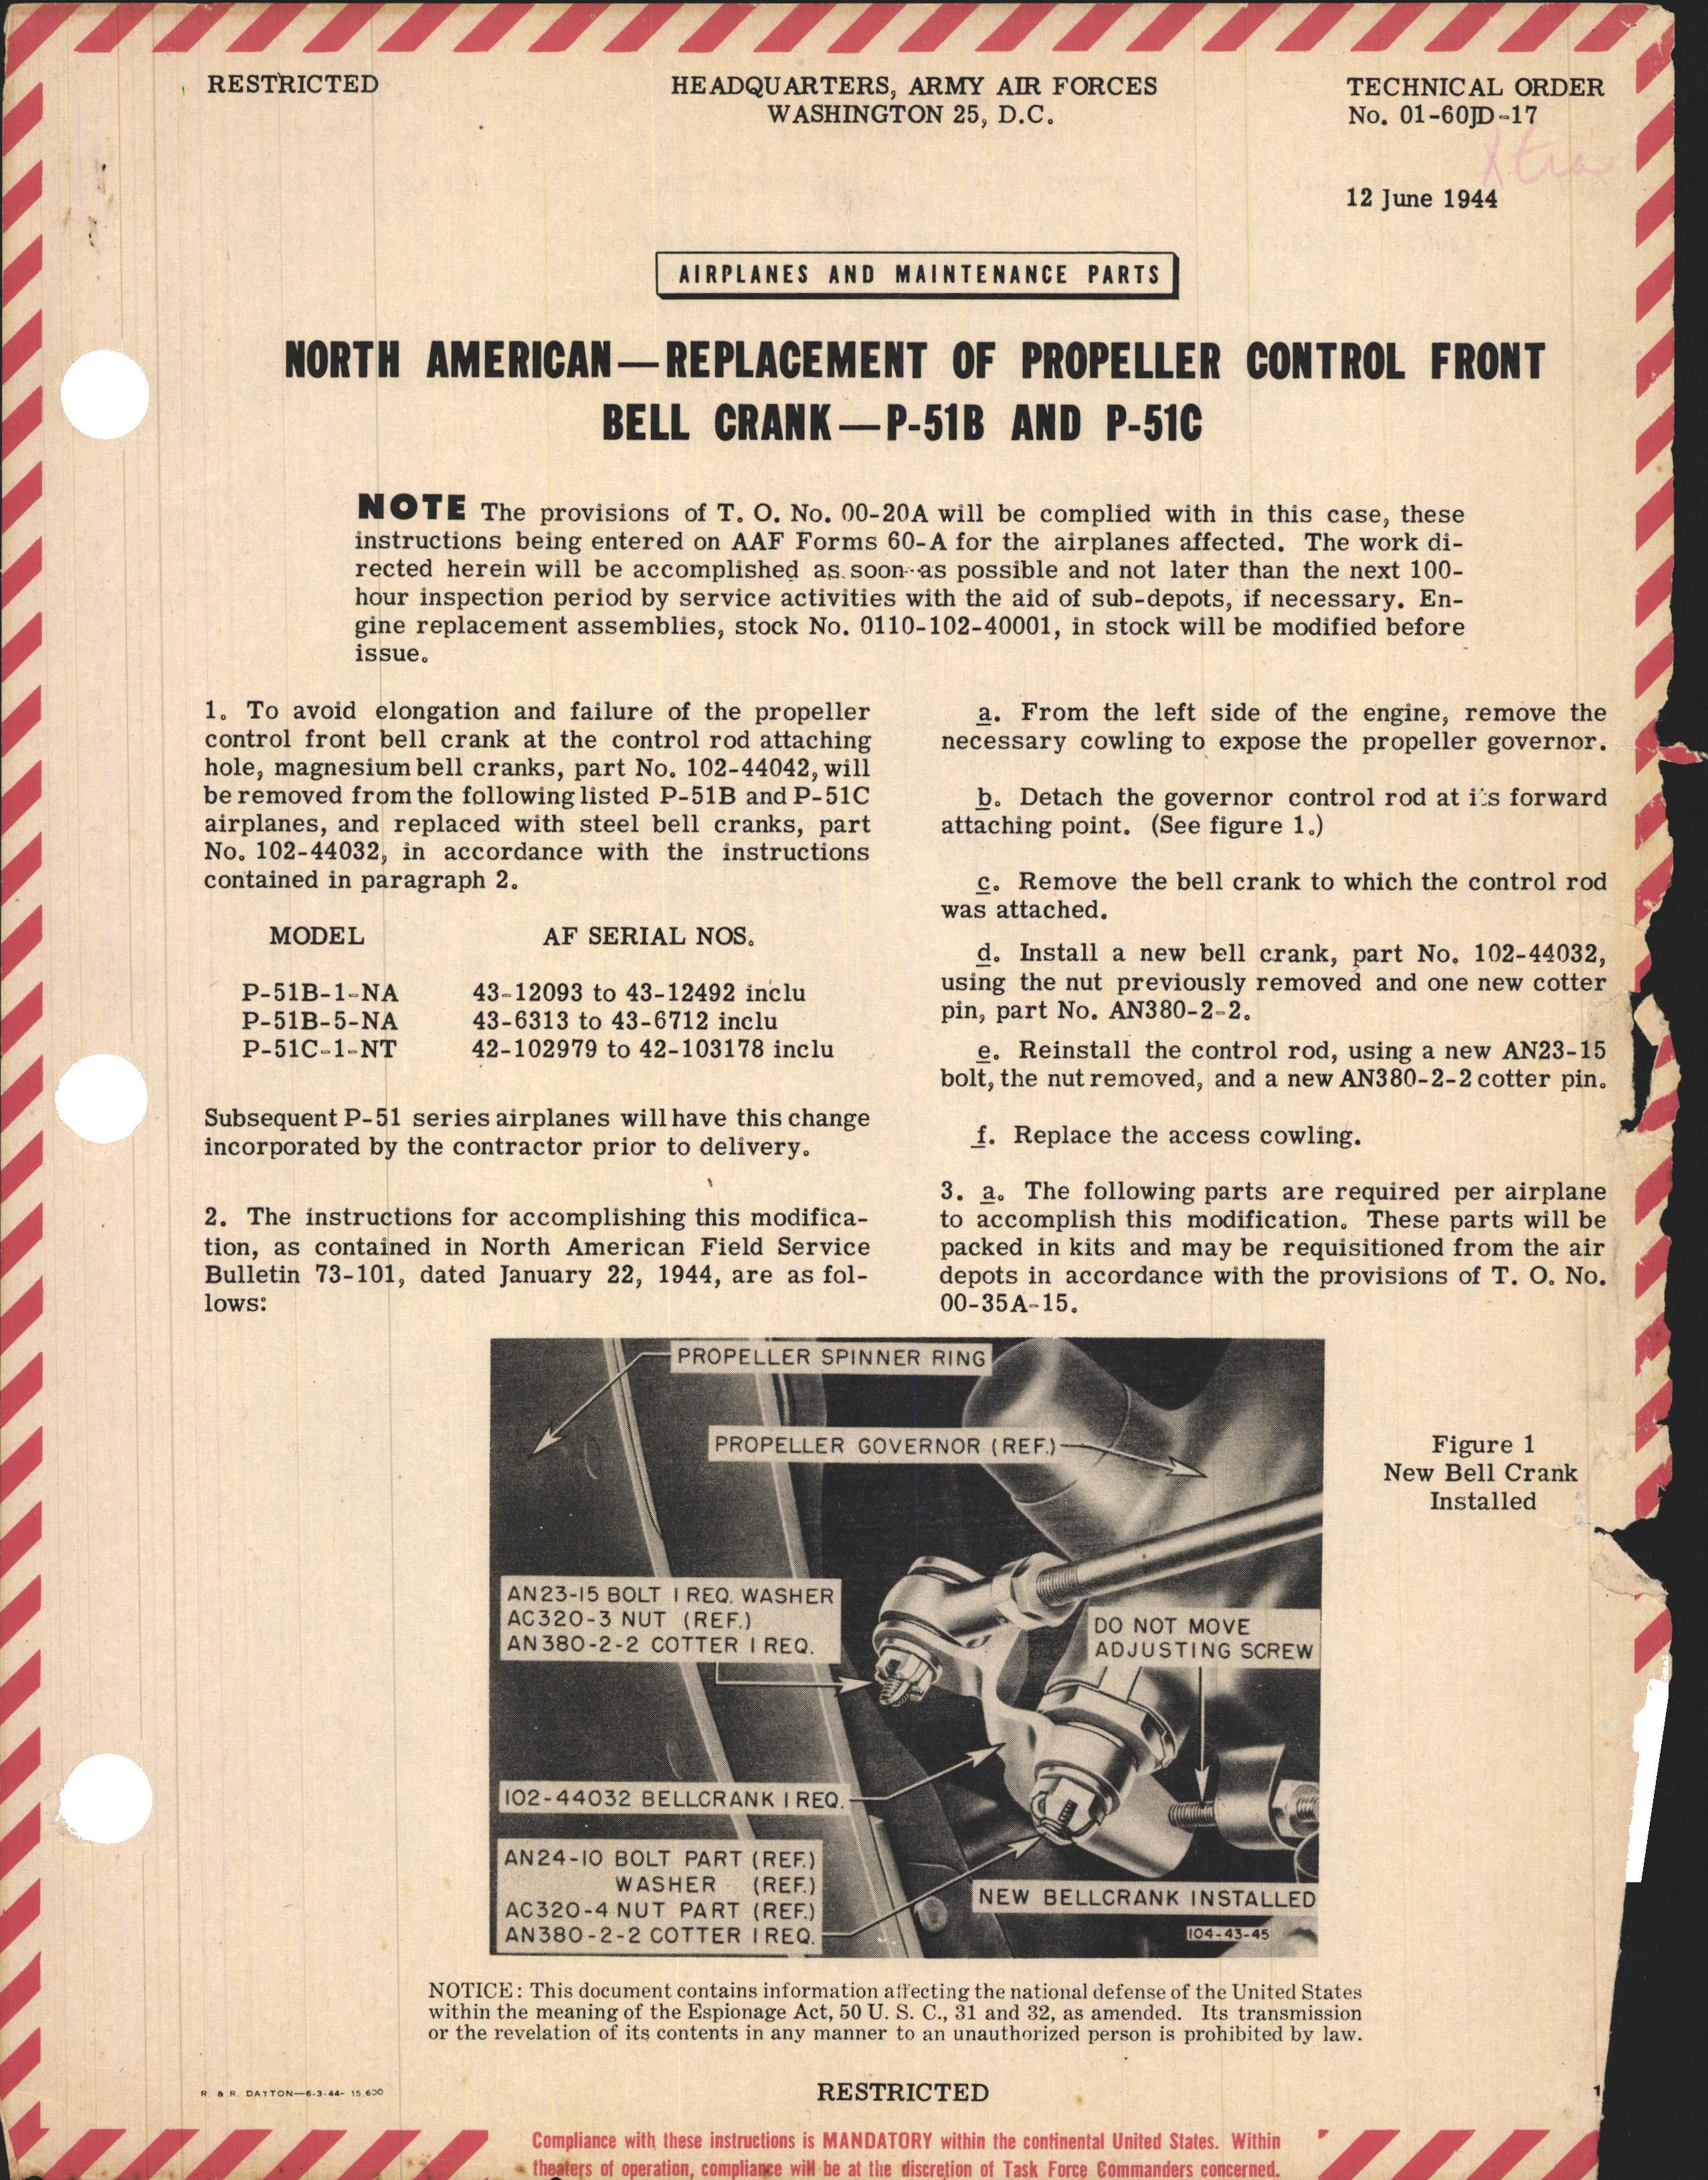 Sample page 1 from AirCorps Library document: Replacement of Propeller Control Front Bell Crank for P-51B and P-51C